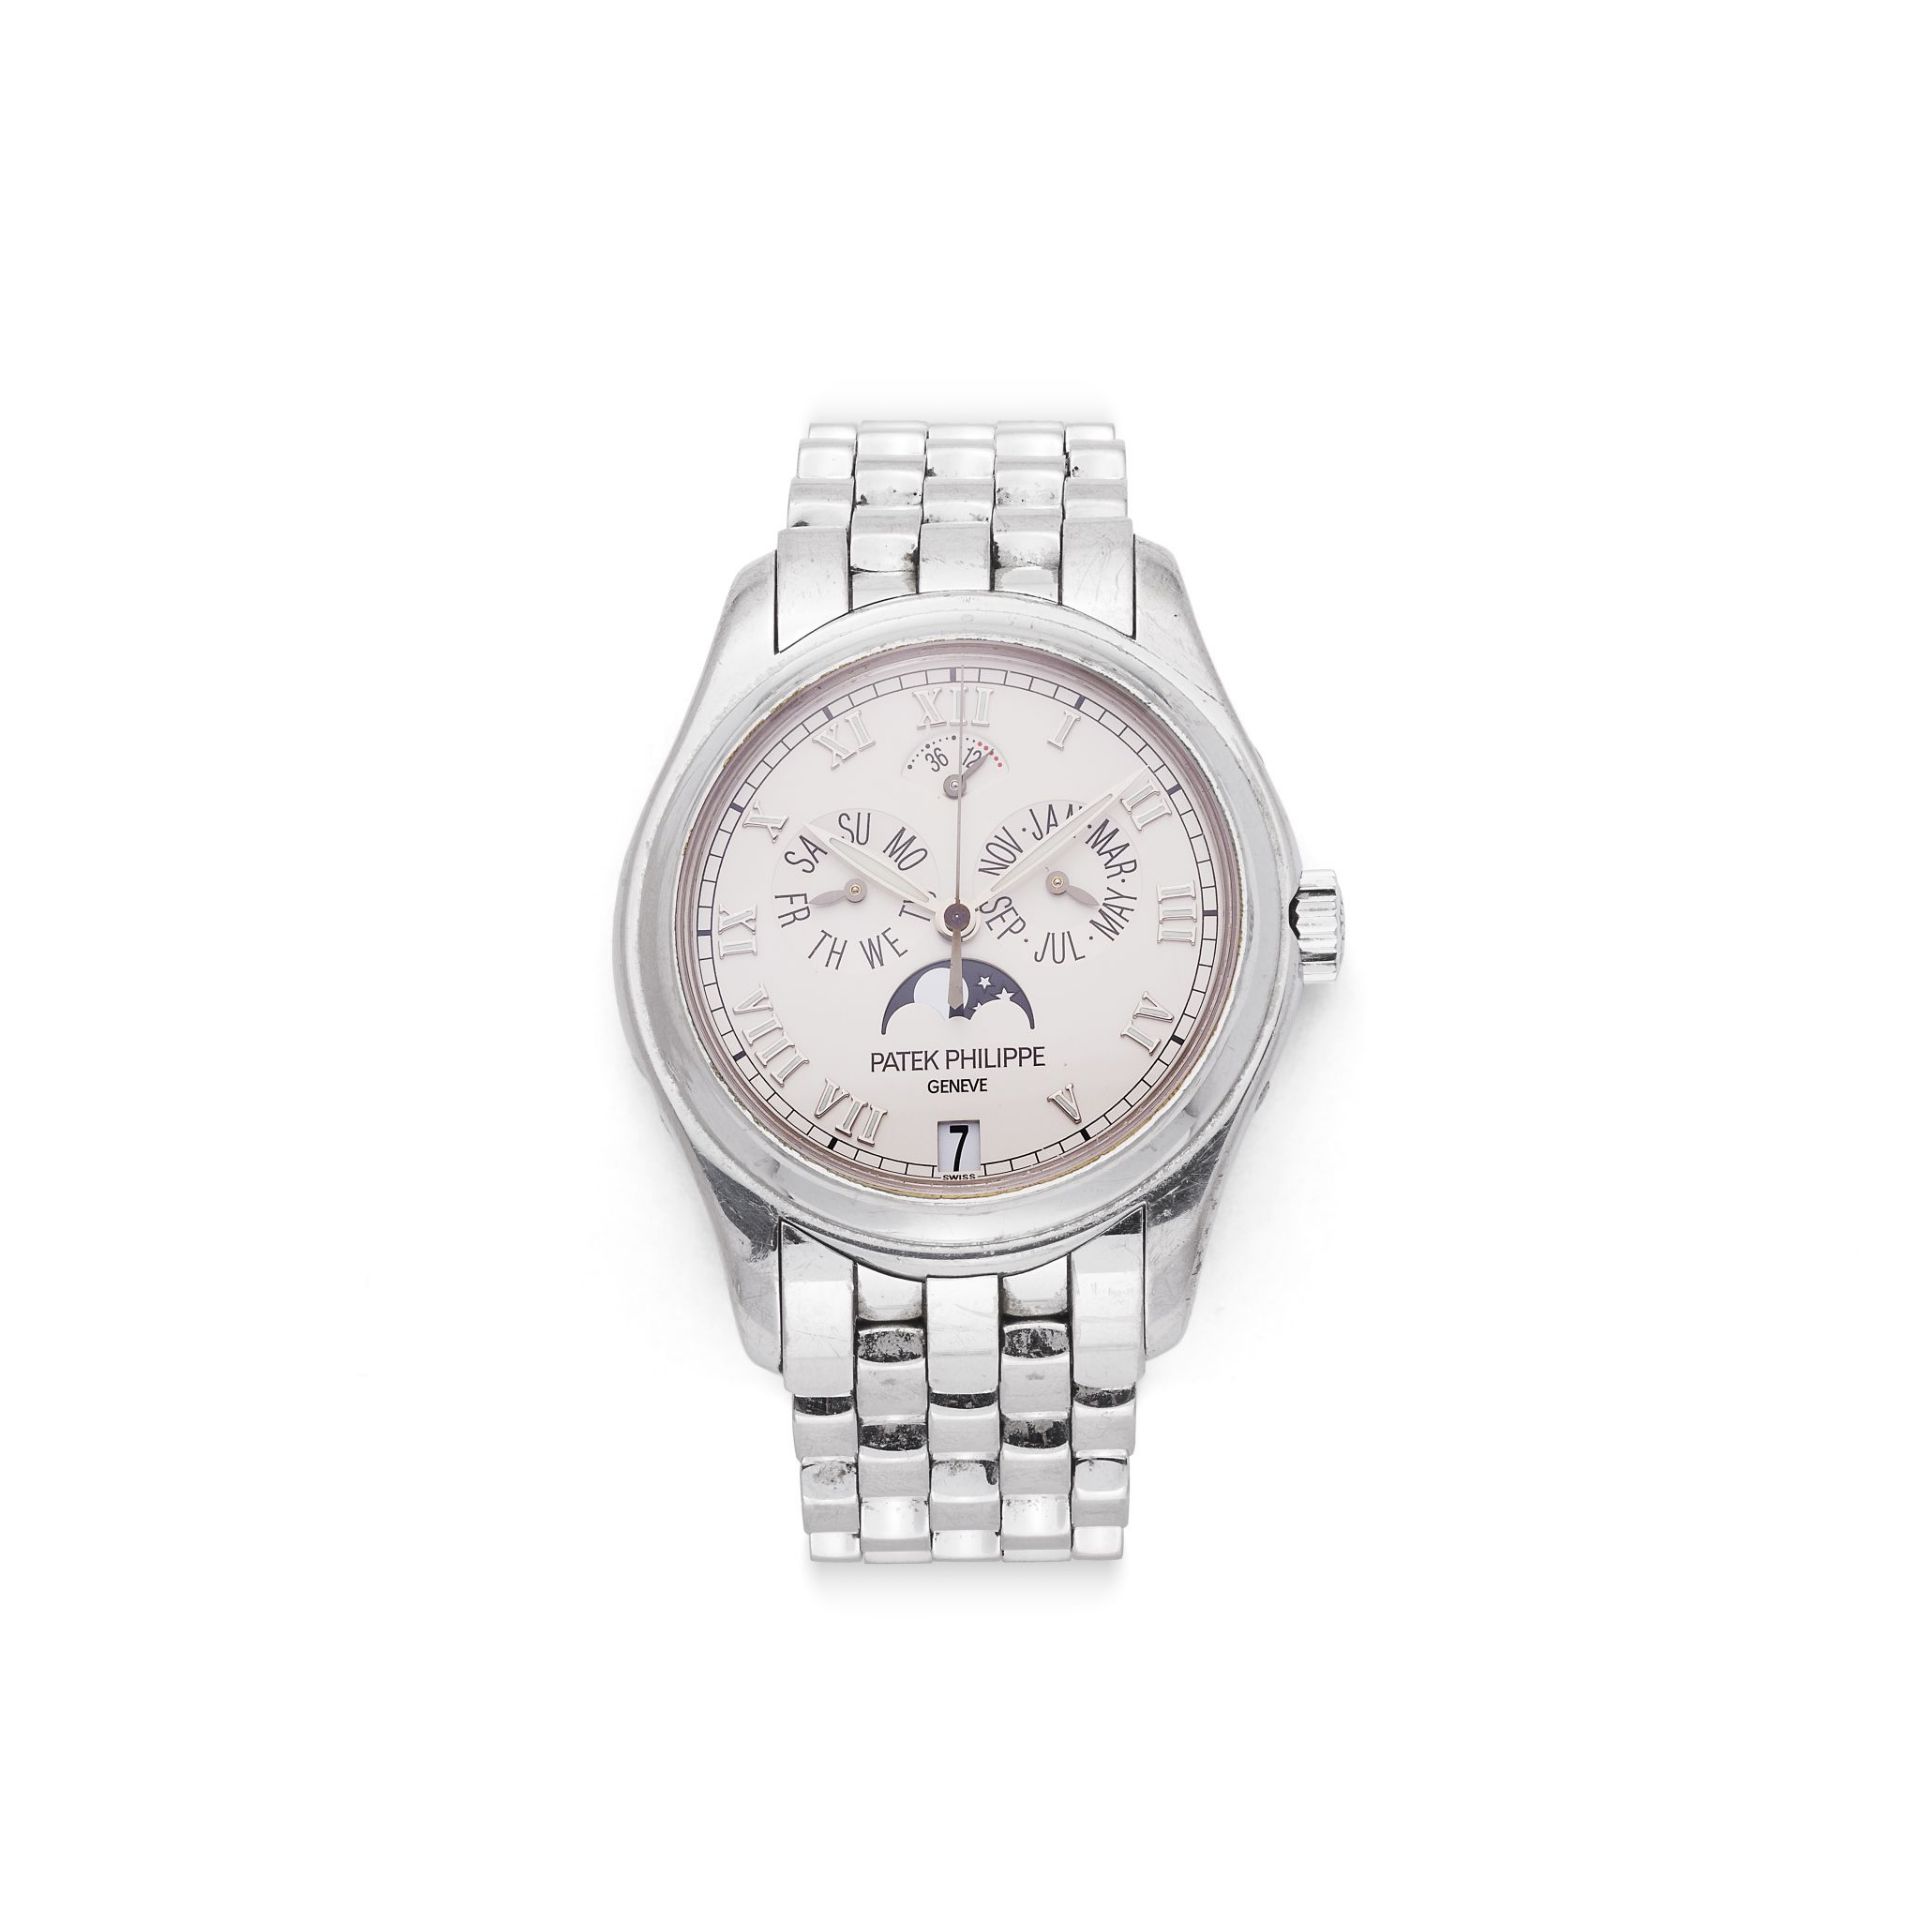 AN 18CT WHITE GOLD ANNUAL CALENDAR MOONPHASE WRISTWATCH, BY PATEK PHILIPPE